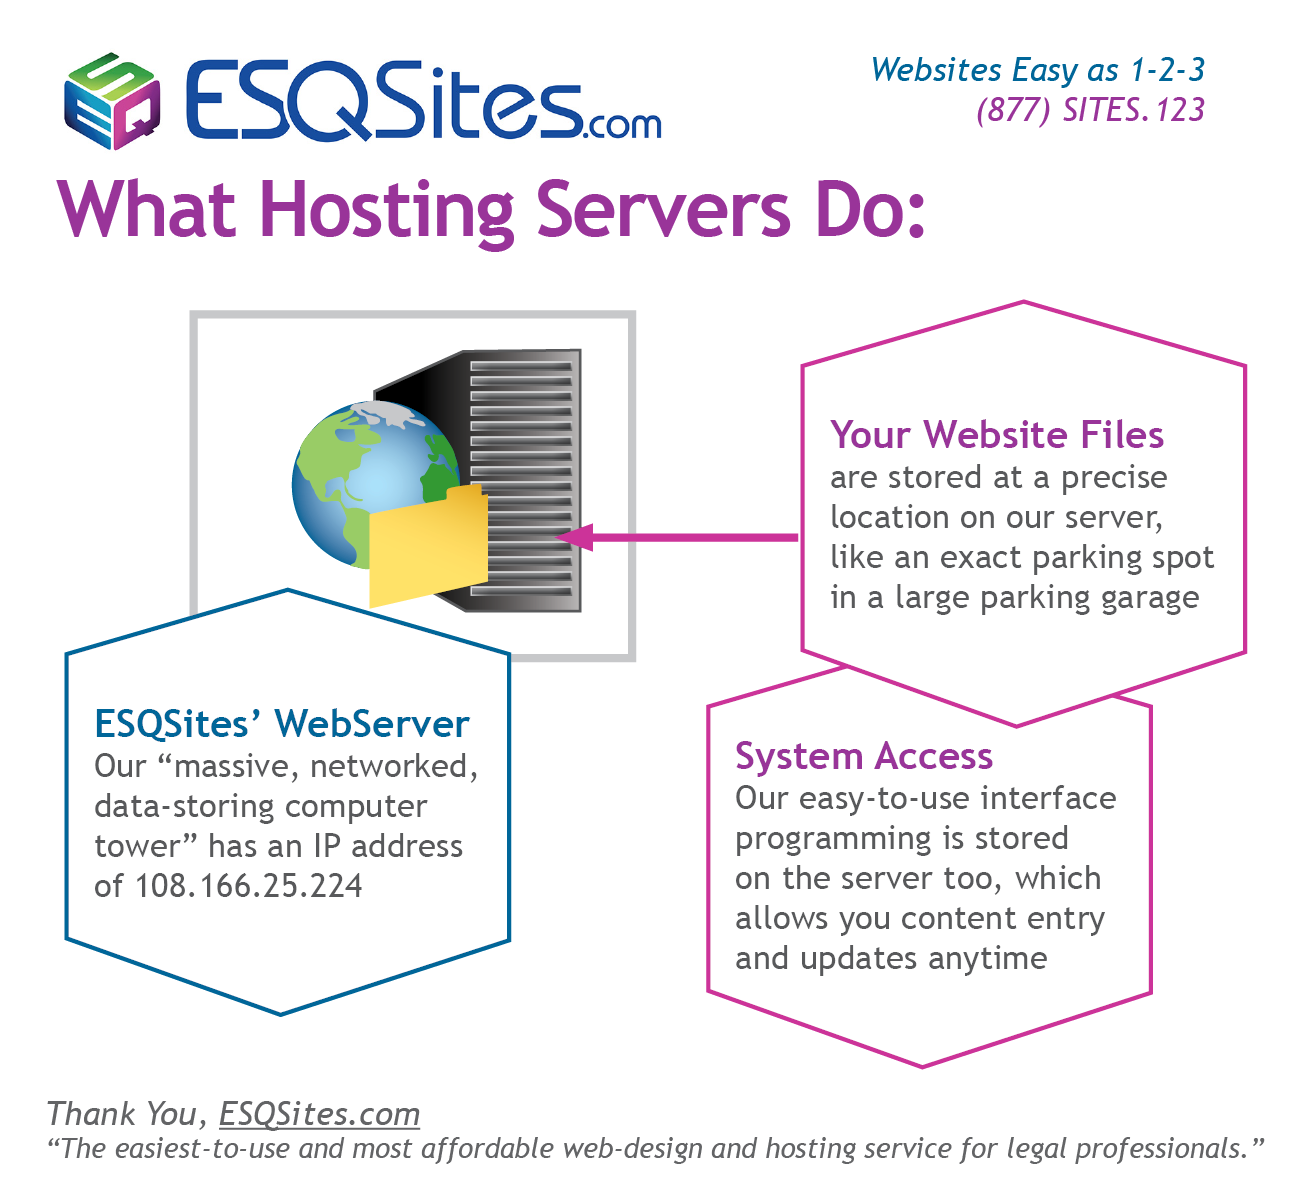 Hosting is not the same as Domain